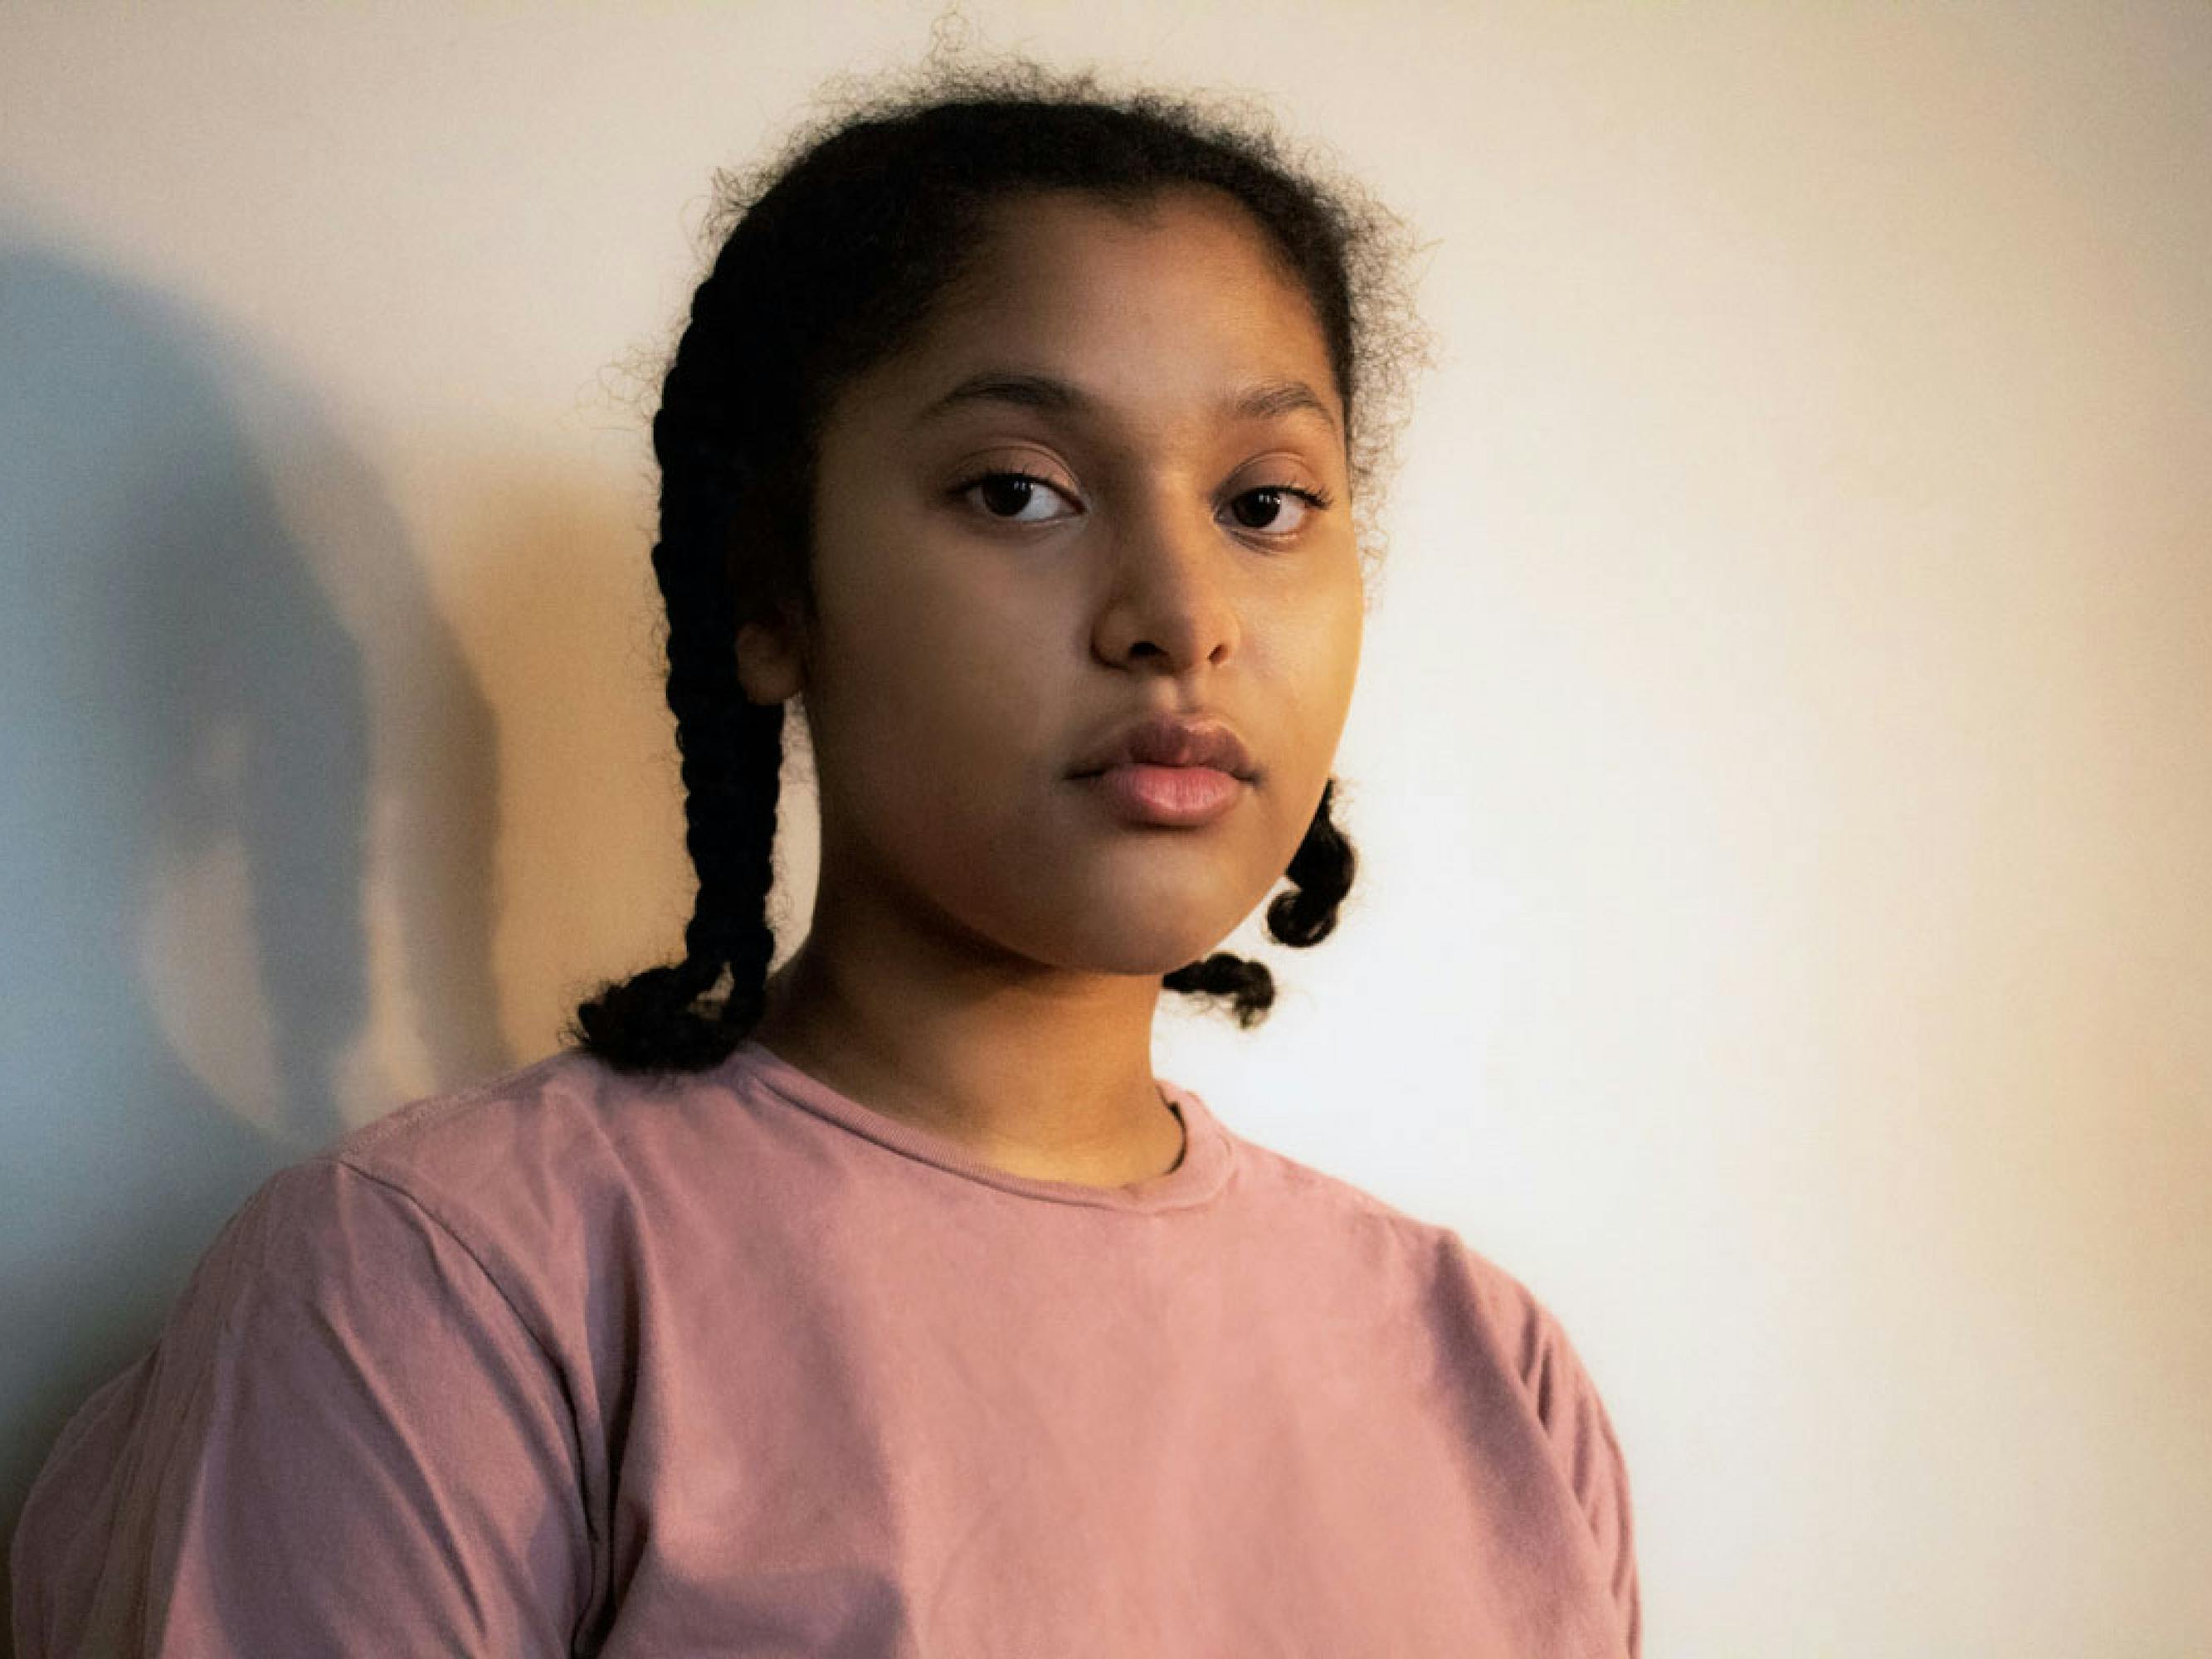 This portrait shows a girl in two short braids and a pink t-shirt. She stands against a white wall, against which her shadow falls. She looks directly into the camera, unsmiling. 